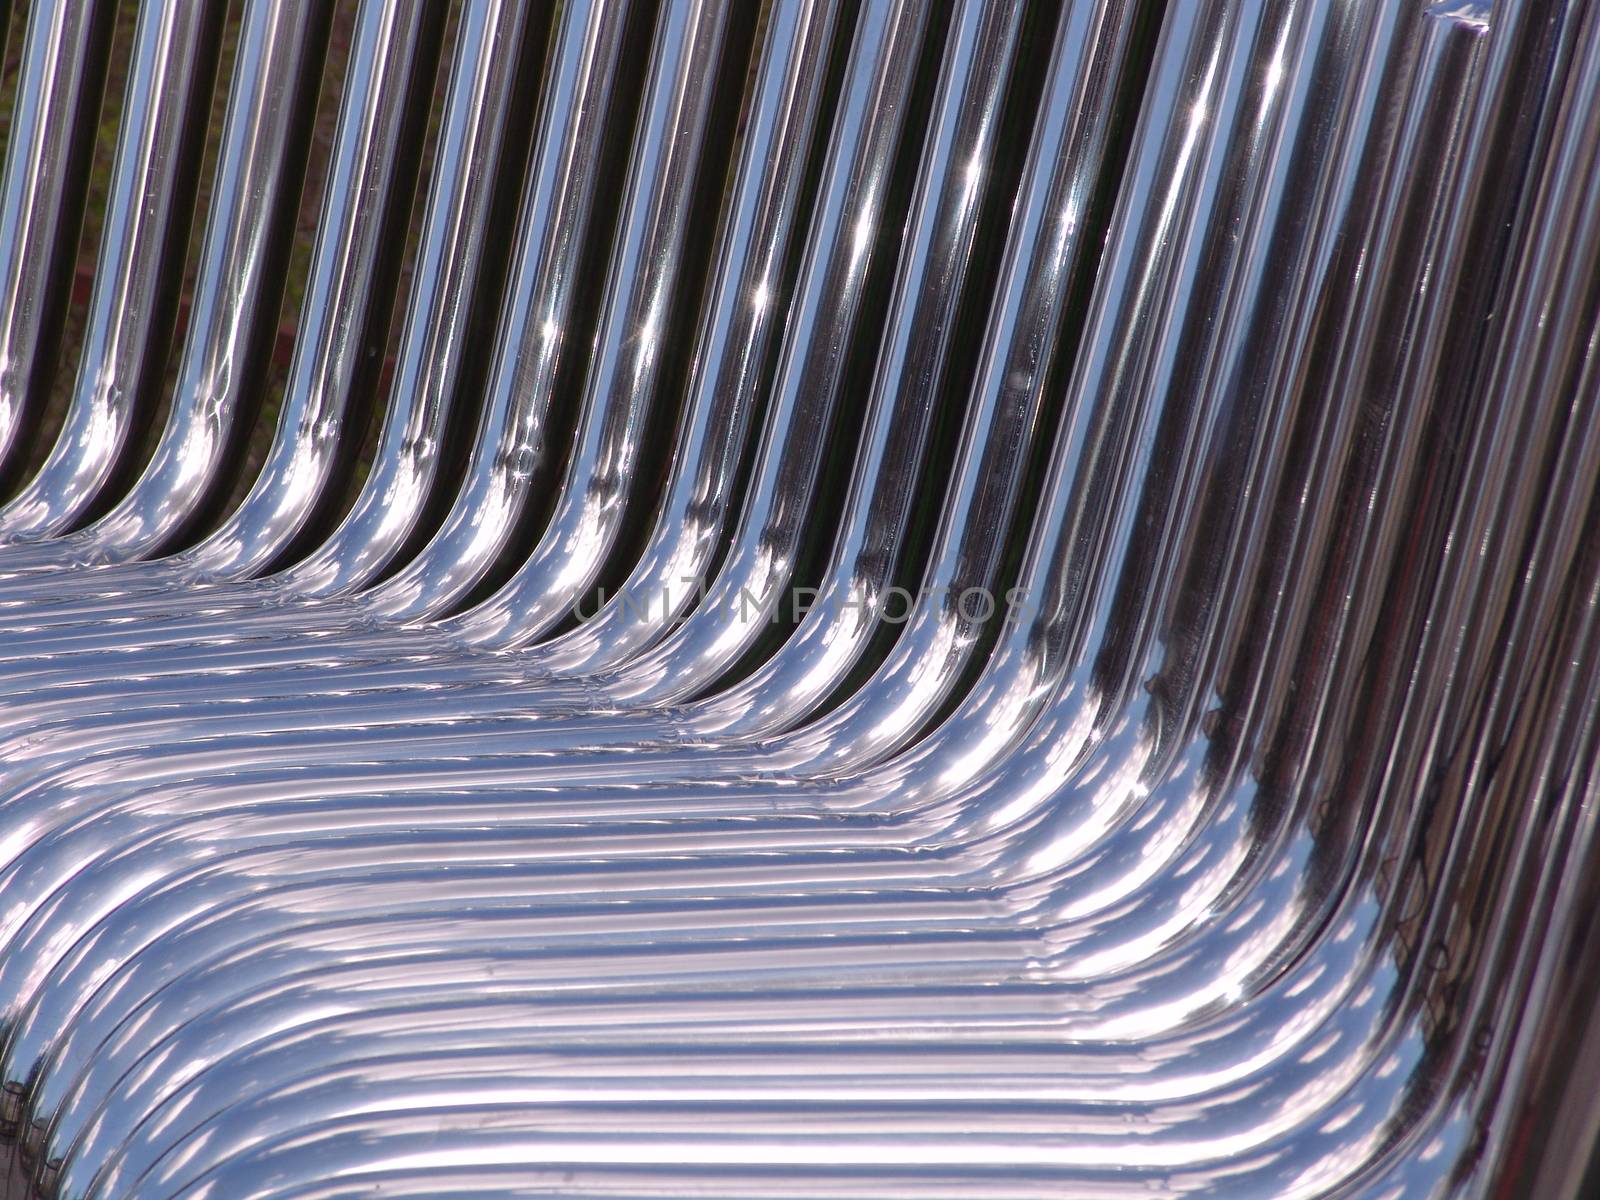 Metal pipes, background